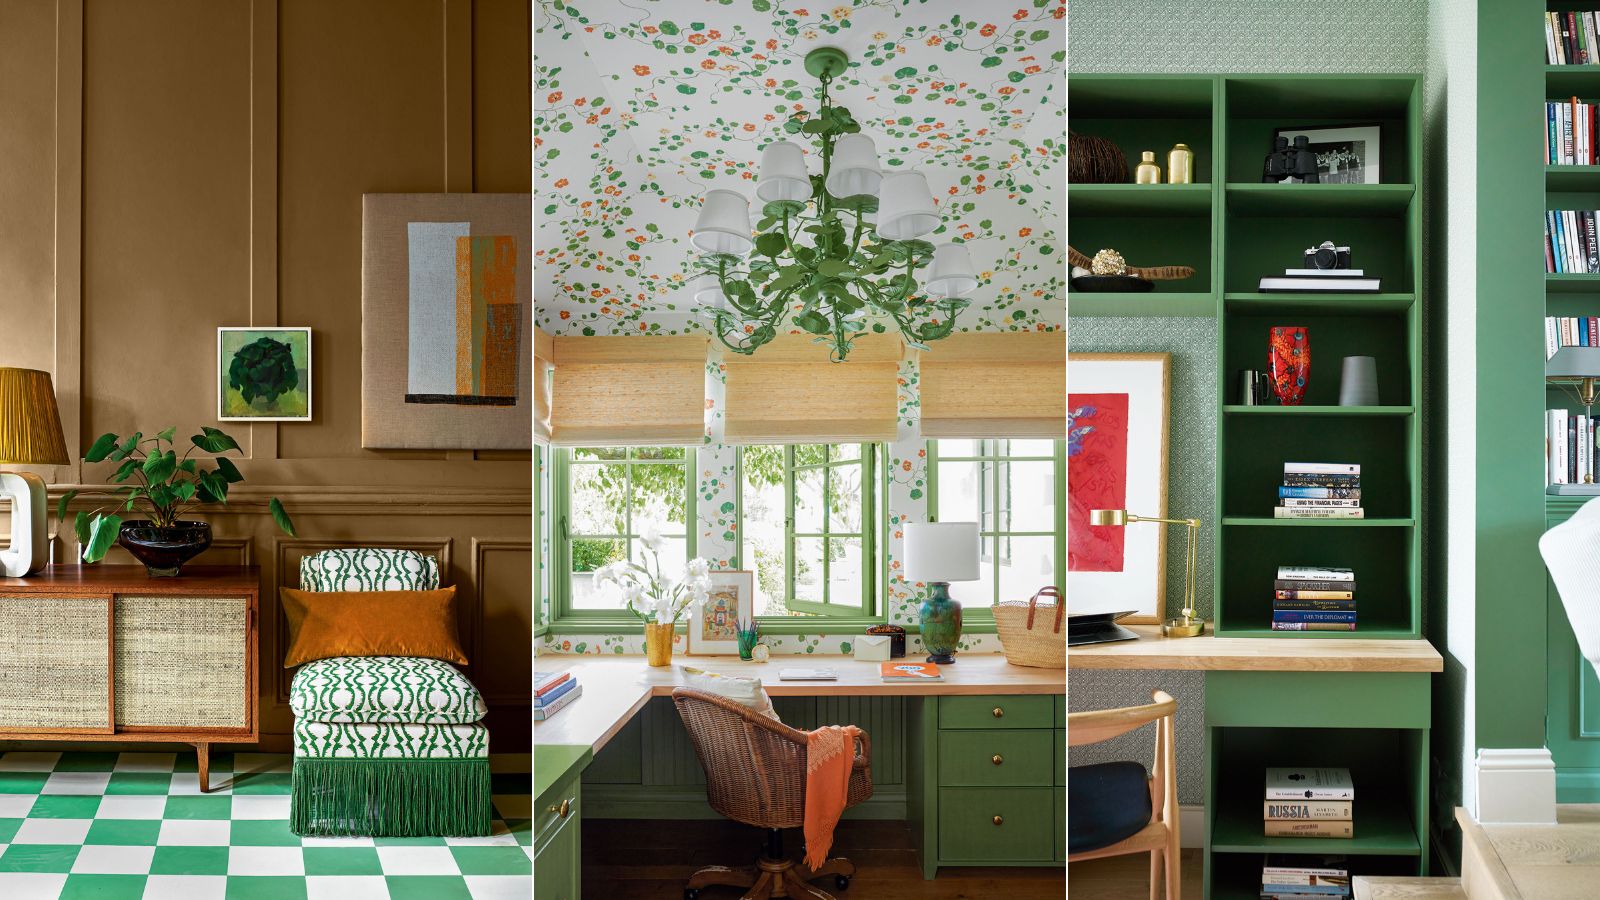 What colors go with green? Experts propose these pairings